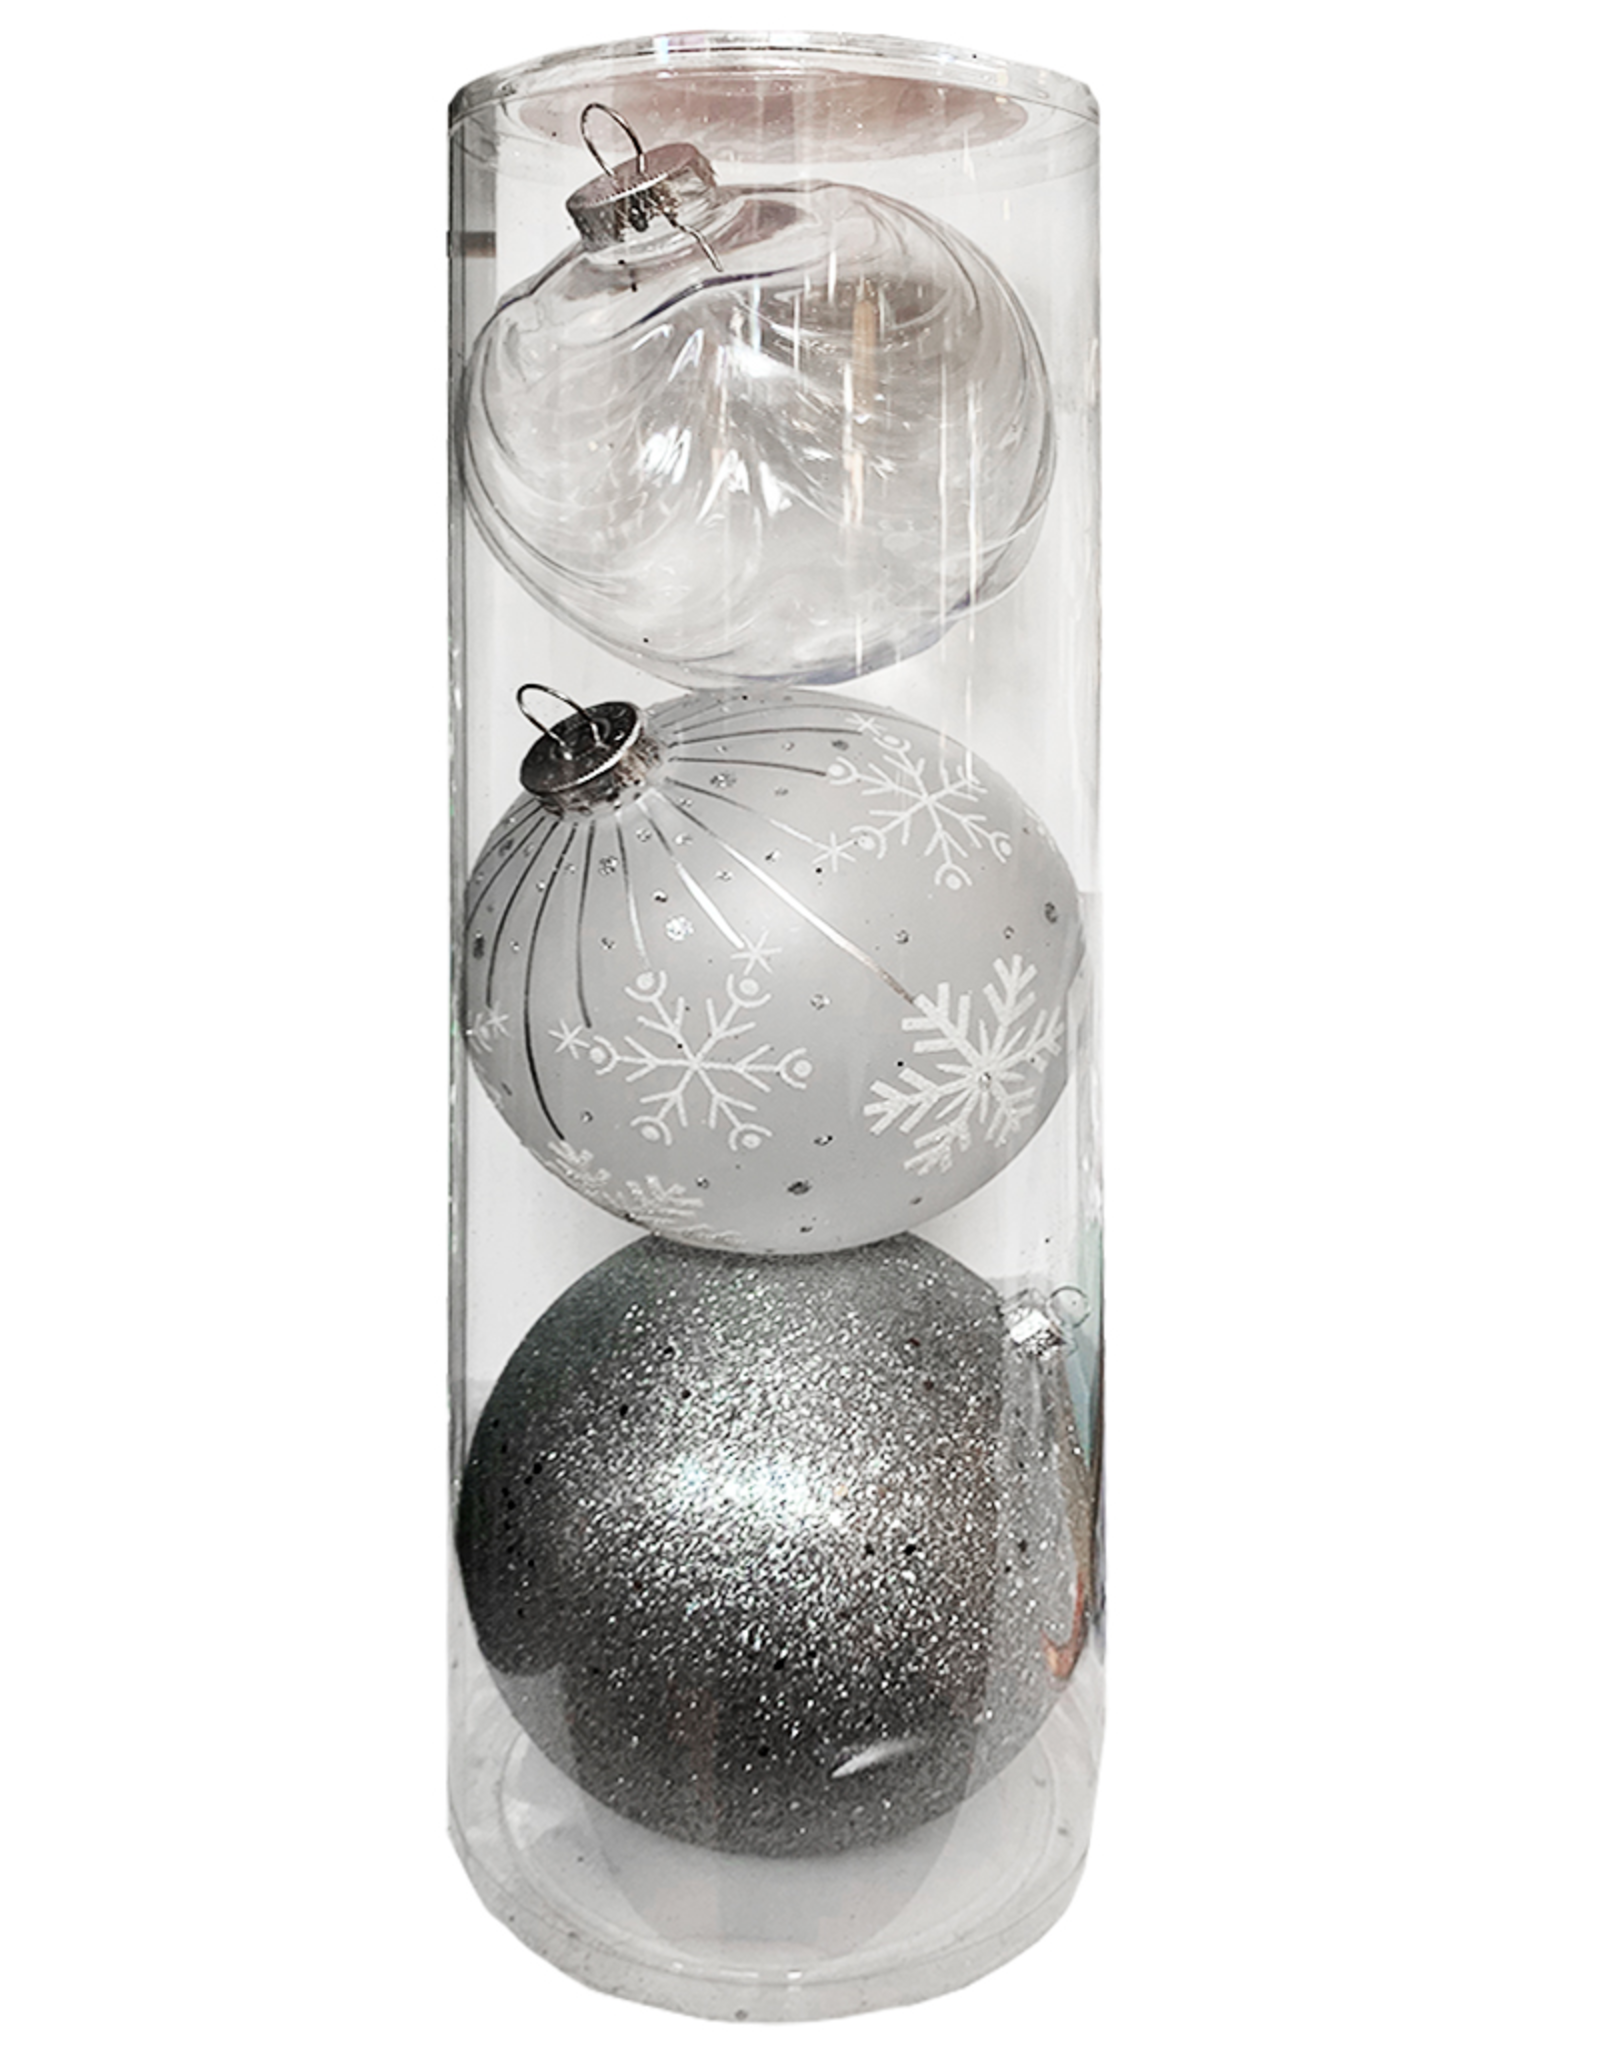 Darice Large Ball Ornaments Silvers 3pk 150mm Shatter-Proof -A